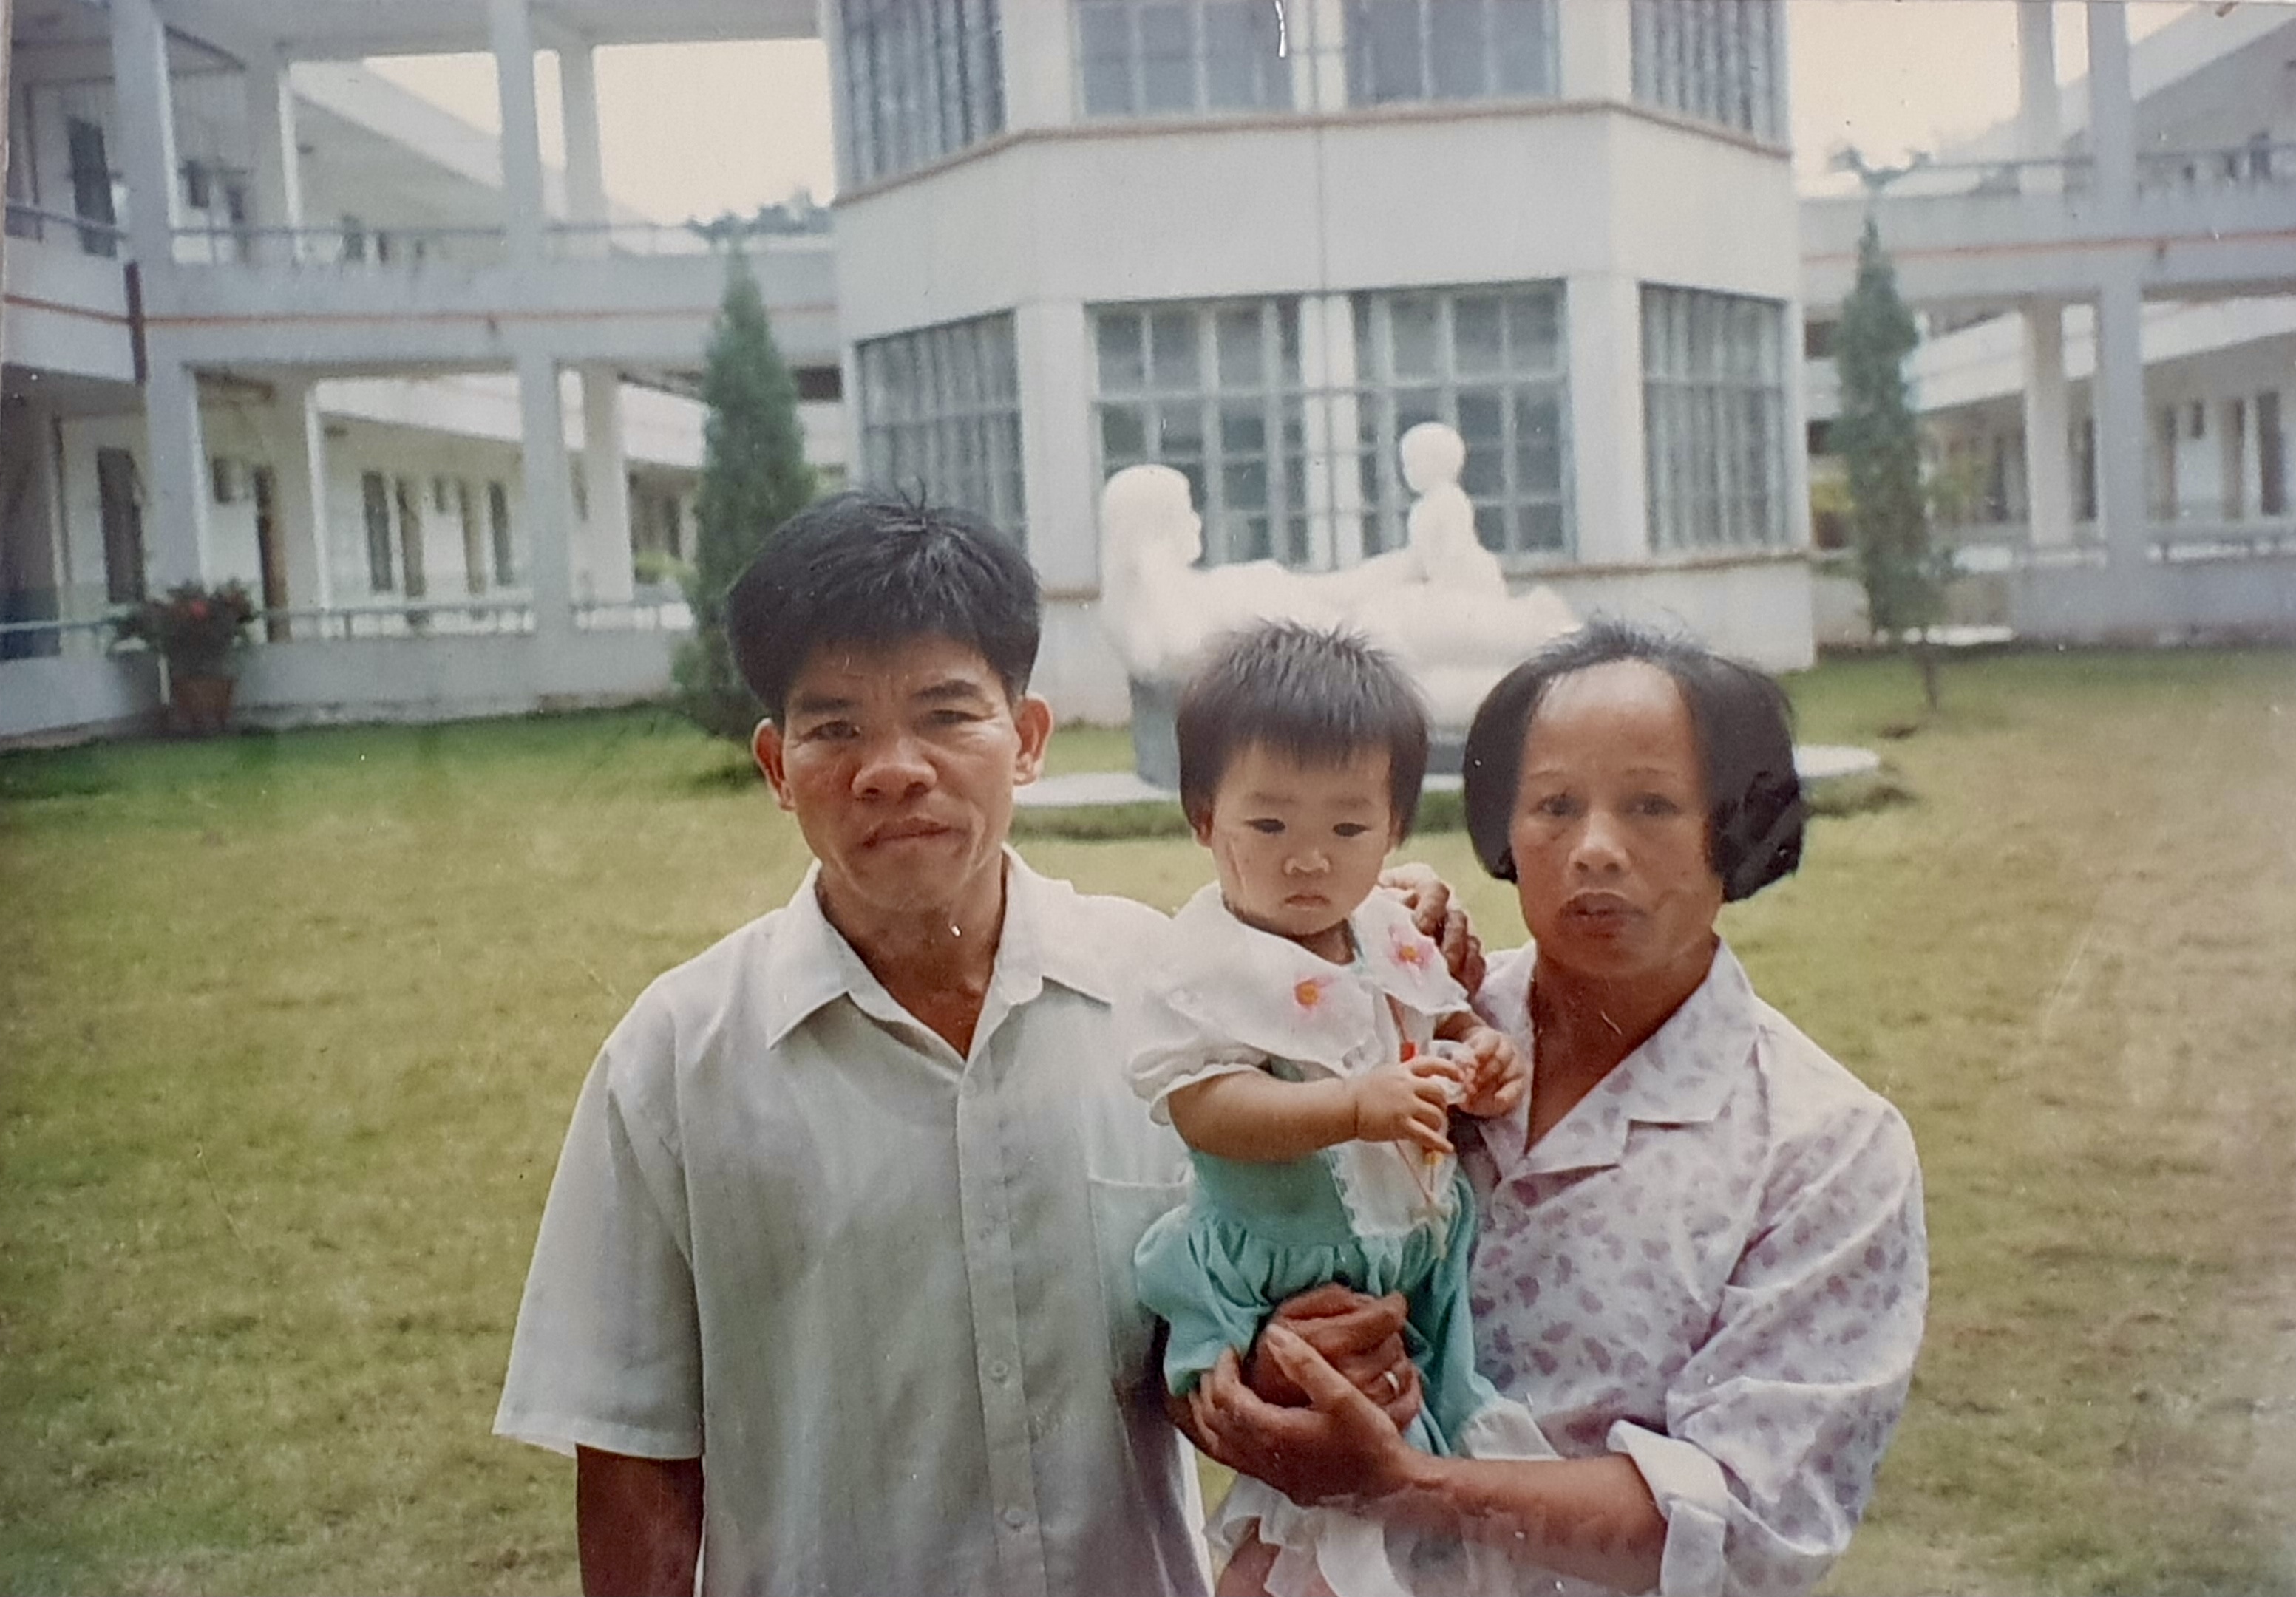 Xiangxia van den Ham, Dumpling Stories – middle aged couple holding a small child in front of a large white building with a statue of a mother and a baby